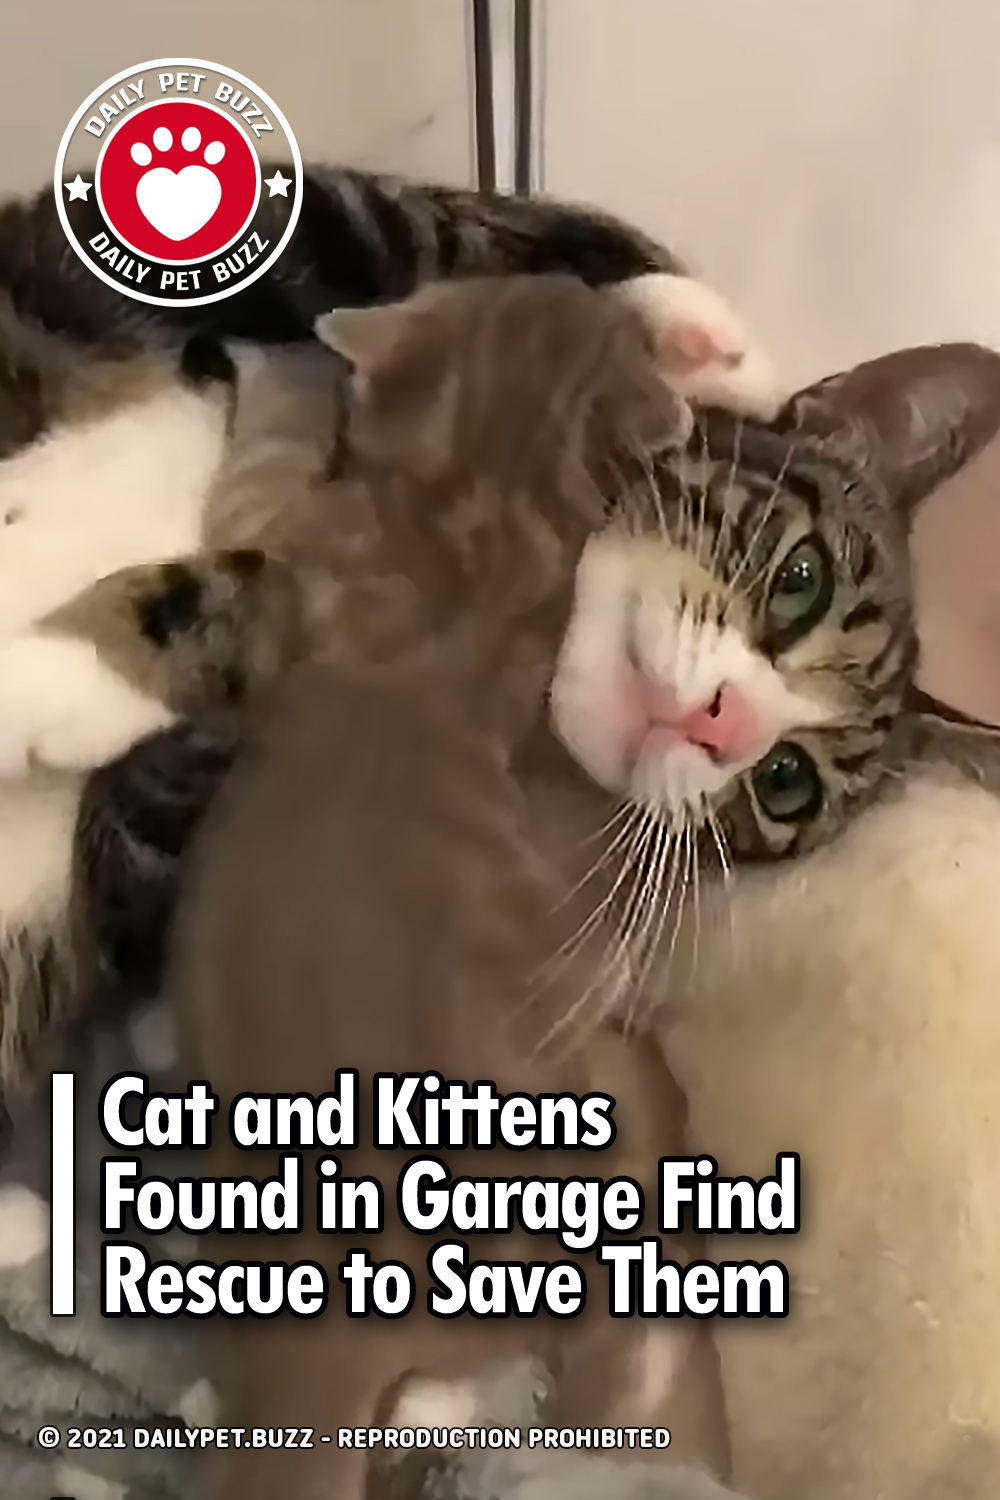 Cat and Kittens Found in Garage Find Rescue to Save Them